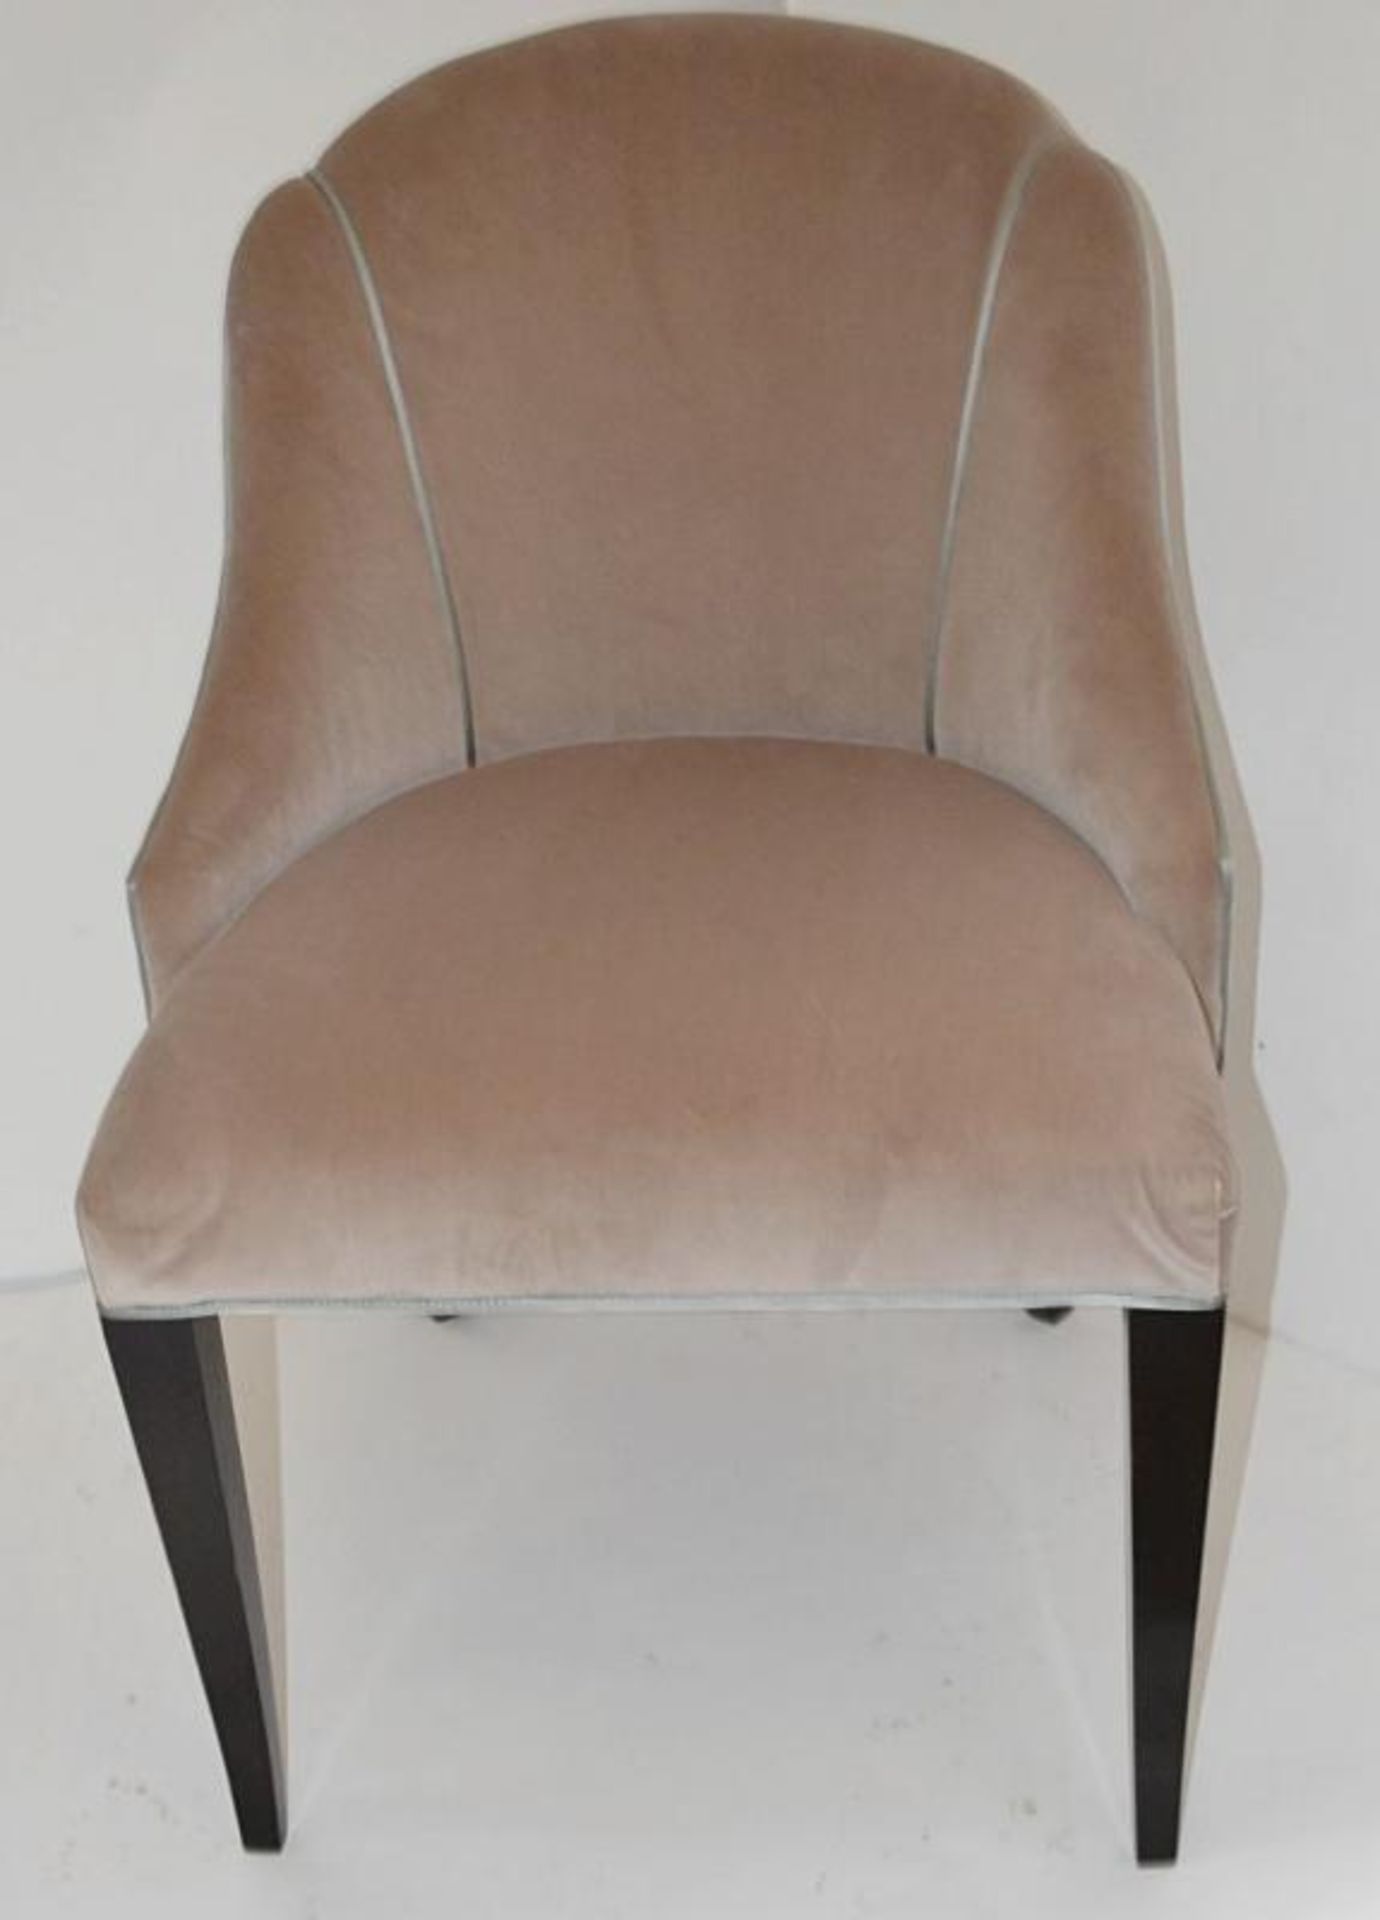 1 x REED &amp; RACKSTRAW "Cloud" Velvet Upholstered Handcrafted Chair - Dimensions: H87 x W58 x D5 - Image 17 of 24